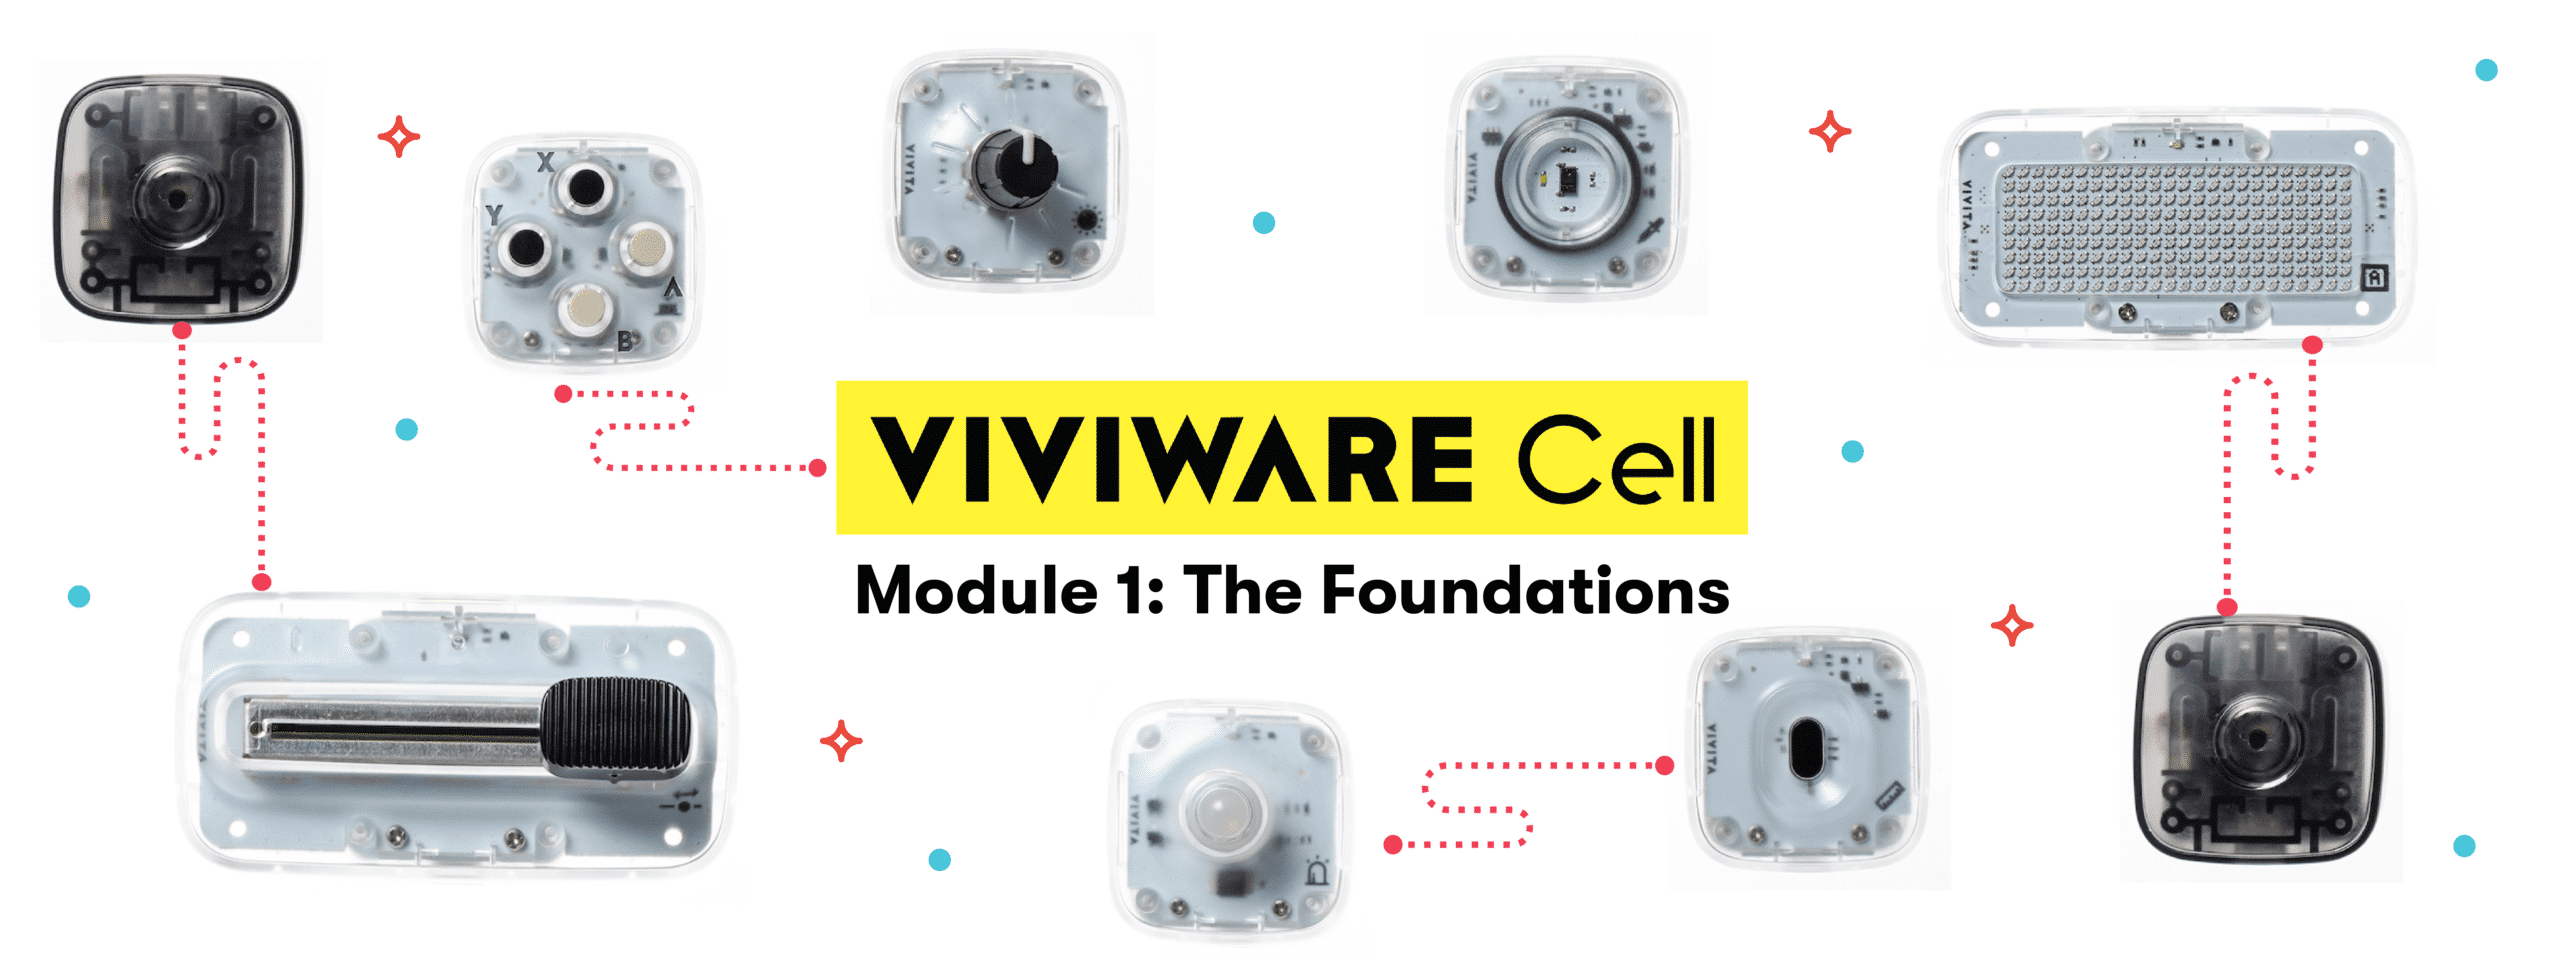 Viviware Cell 1, Part B: The Foundations